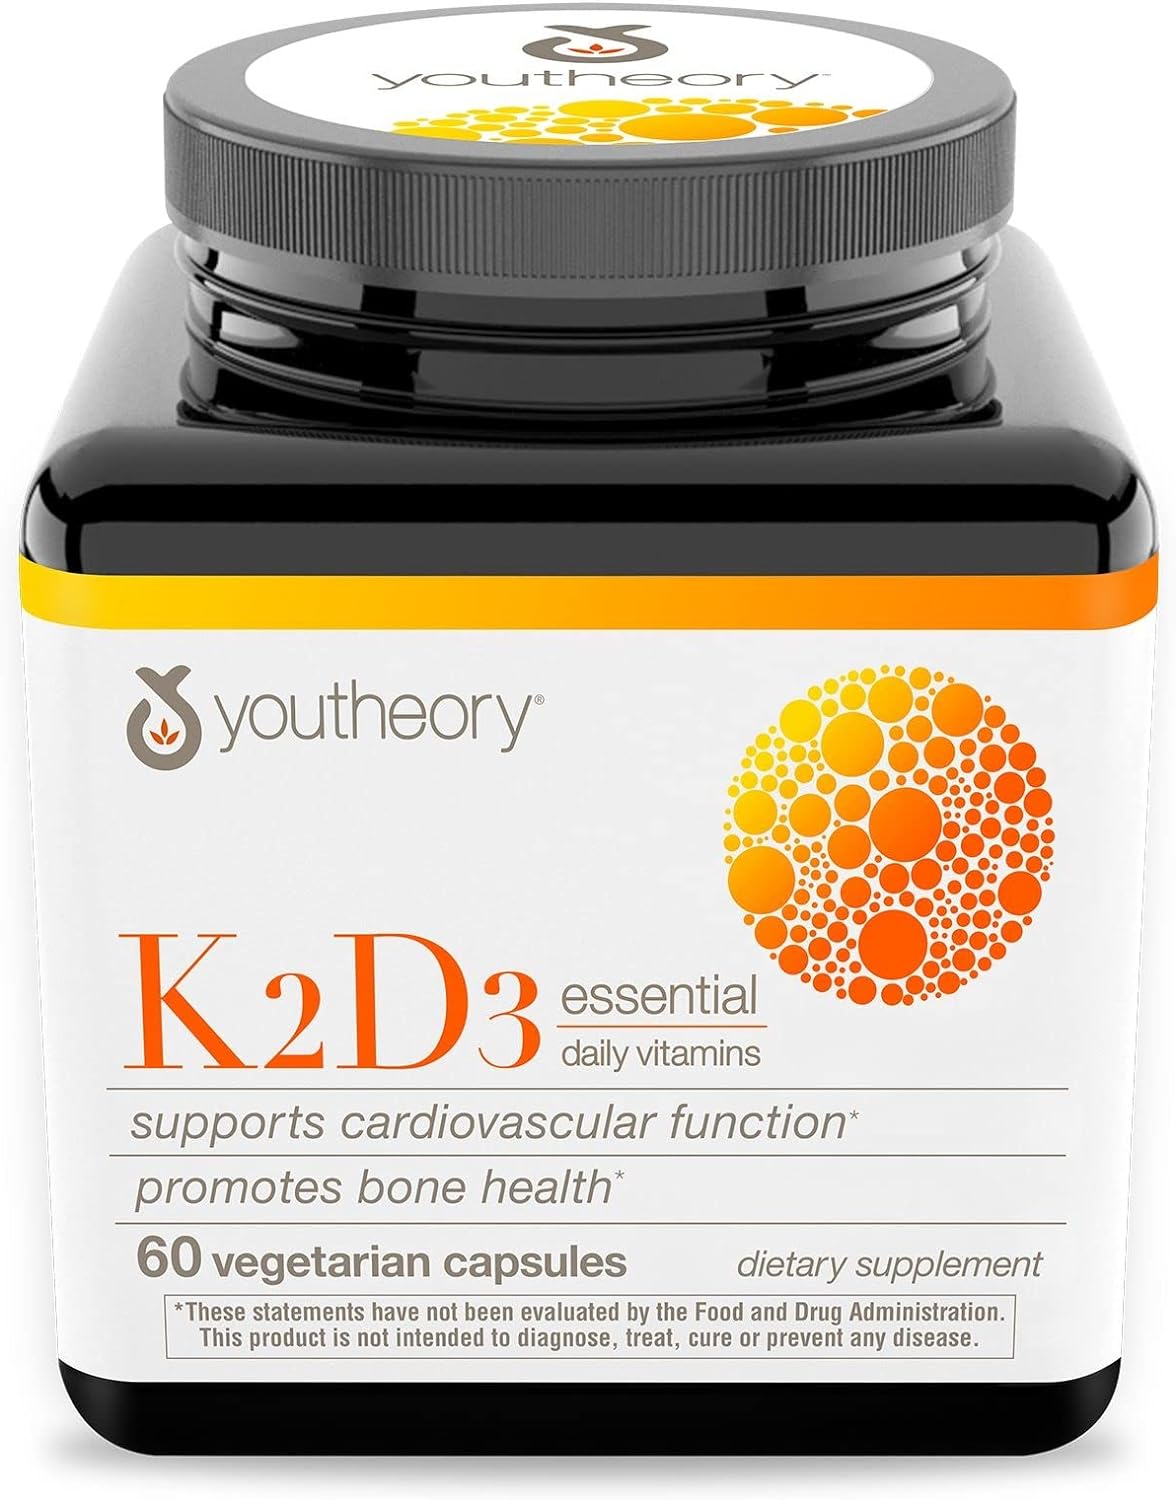 Youtheory K2 and D3 Daily Vitamin Supplement for Calcium Absorption, Bone Strength and Cardiovascular Support, 60 Vegetarian Capsules